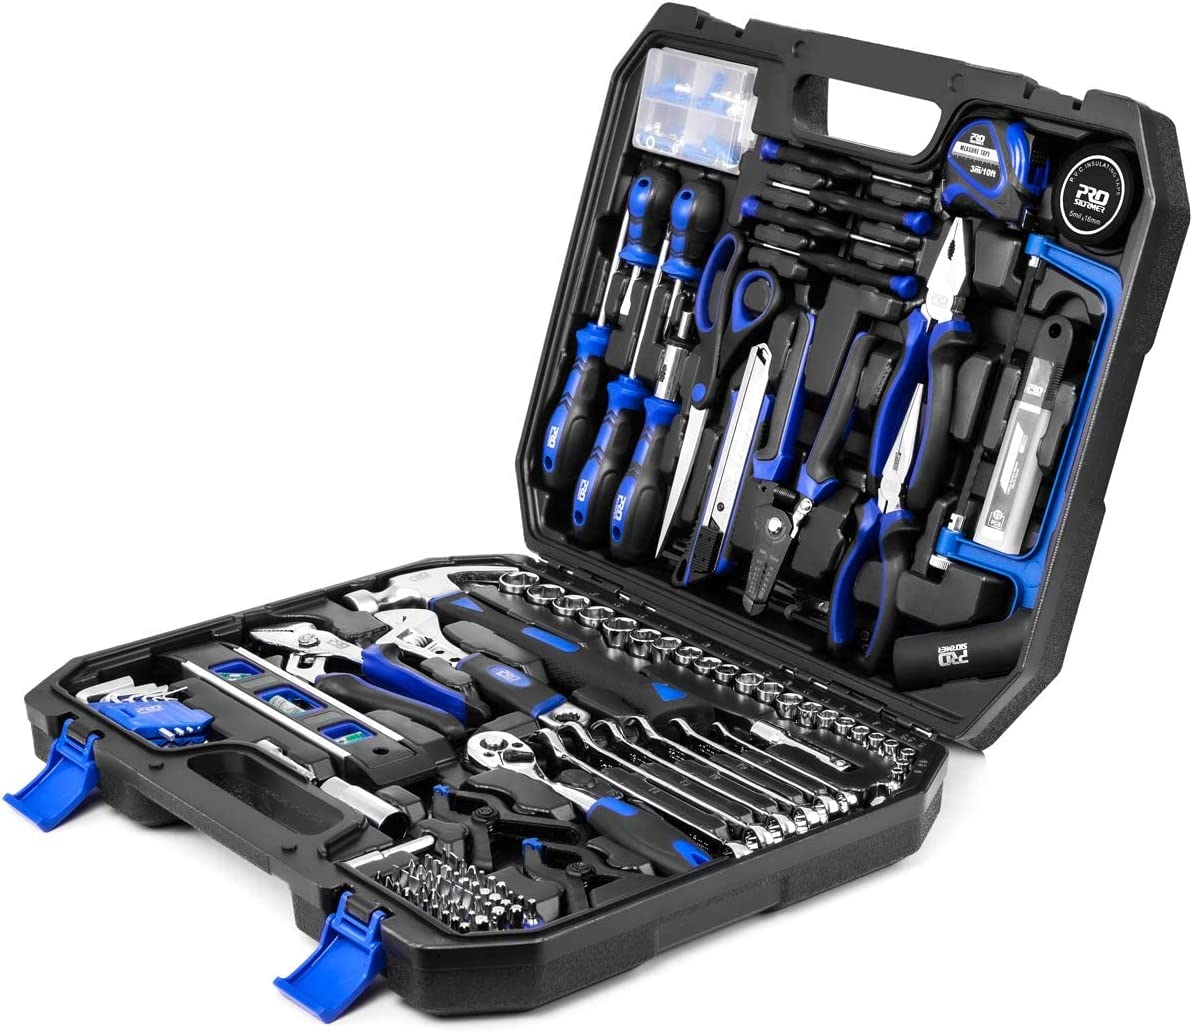 210-Piece Household Tool Kit,  General Home/Auto Repair Tool Set with Hammer, Pliers, Screwdriver Set, Wrench Socket Kit and Toolbox Storage Case - Perfect for Homeowner, Diyer, Handyman